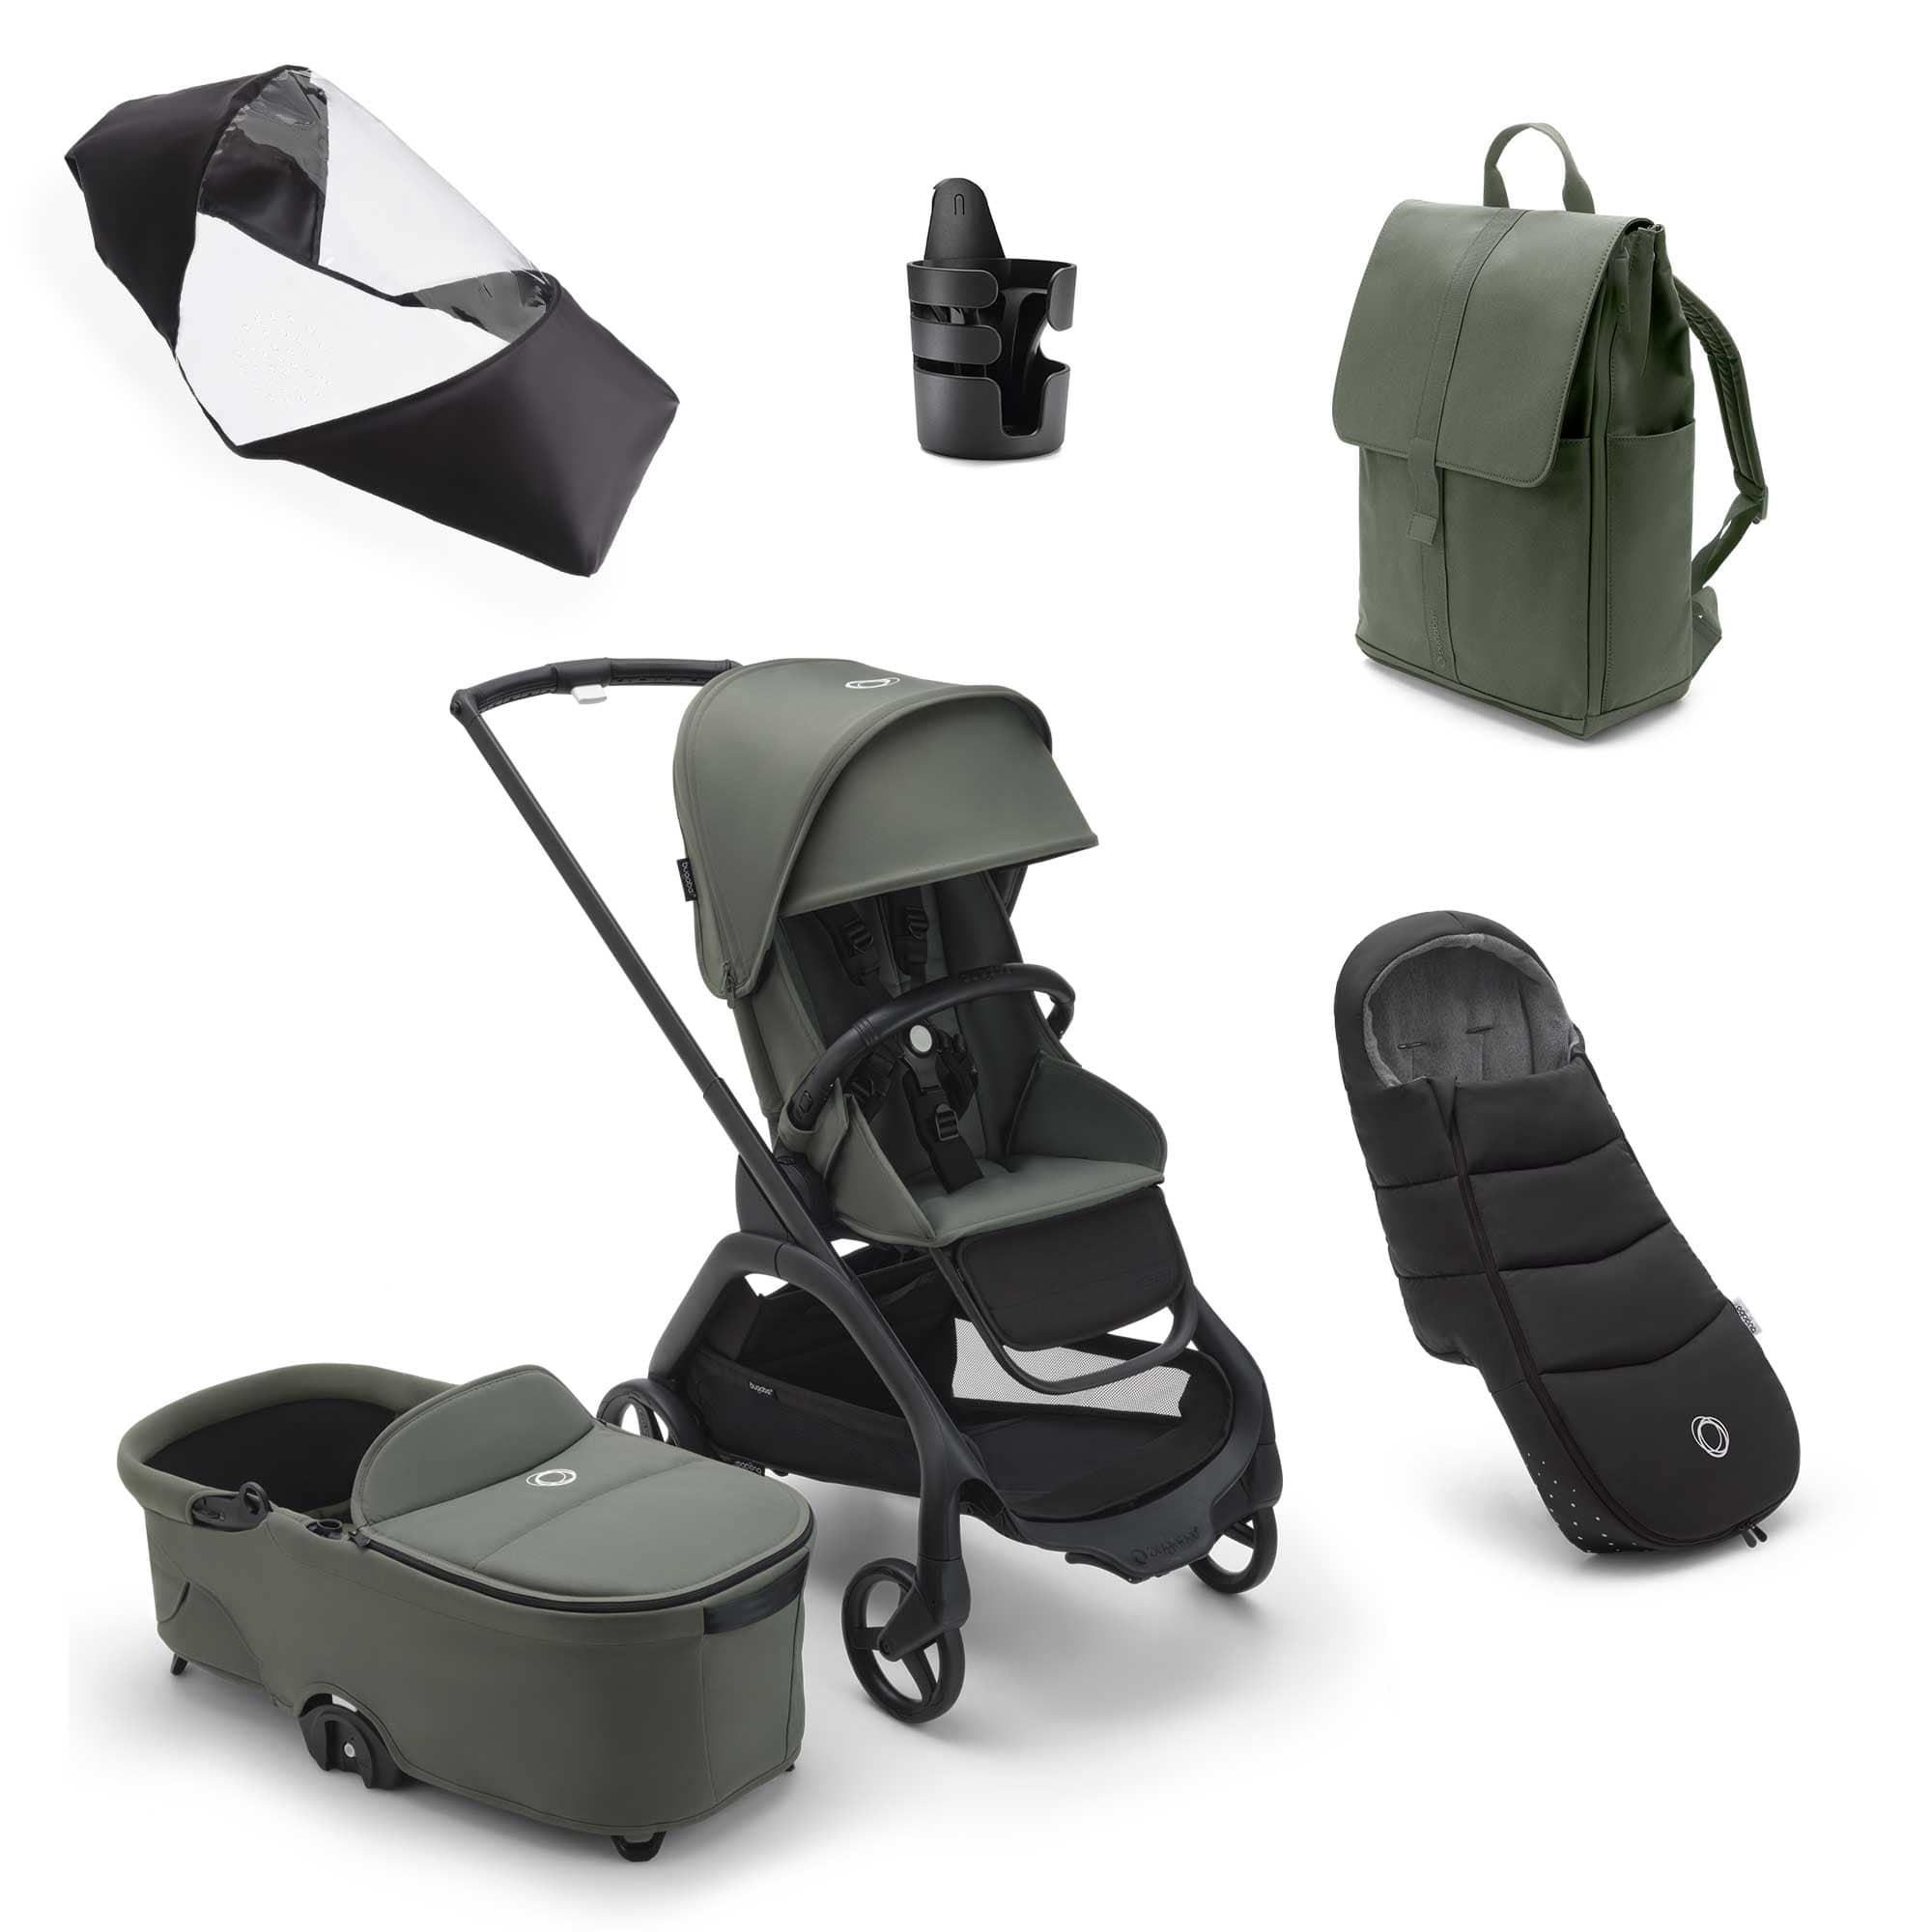 Bugaboo Dragonfly Complete Bundle - Black/Forest Green Baby Prams 13814-BLK-FOR-GRN 8717447581772